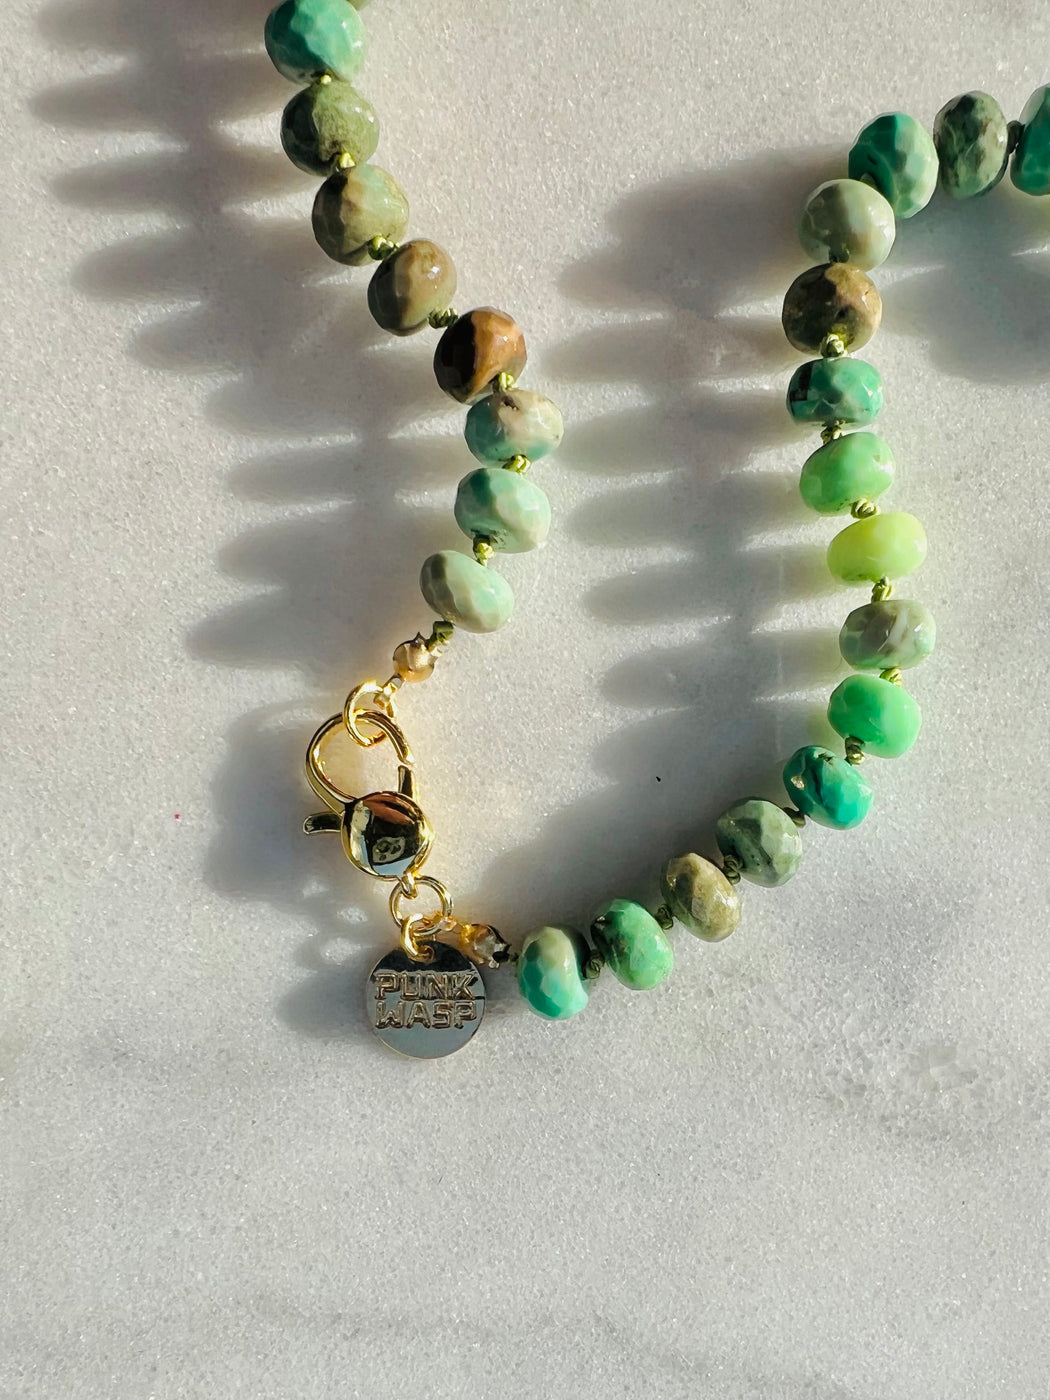 Faceted Ombre Chrysoprase on hand knotted silk chord, with glass eye charm, gold fill clasp.  Named after the green one eyed figure we all know as Mike Wazowski - a perfect reflection of the Chrysoprase hues & eye charm pairing.